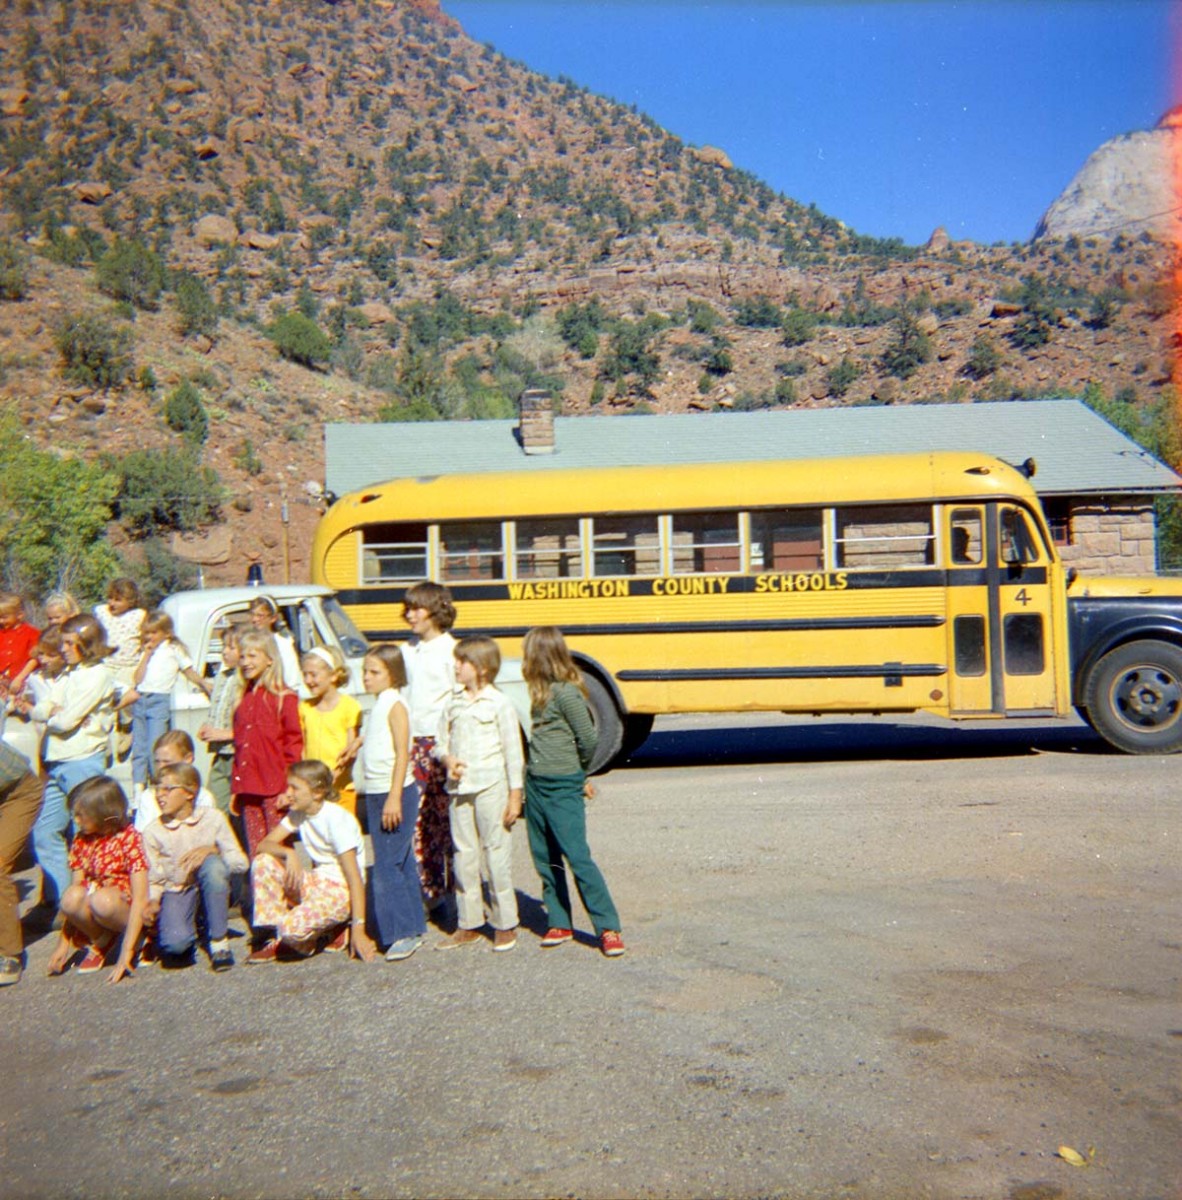 A group of young students gather together for a photo next to a vintage yellow school bus in front of desert hills dotted with brown dusty rocks and green shrubbery beneath a deep blue sky.